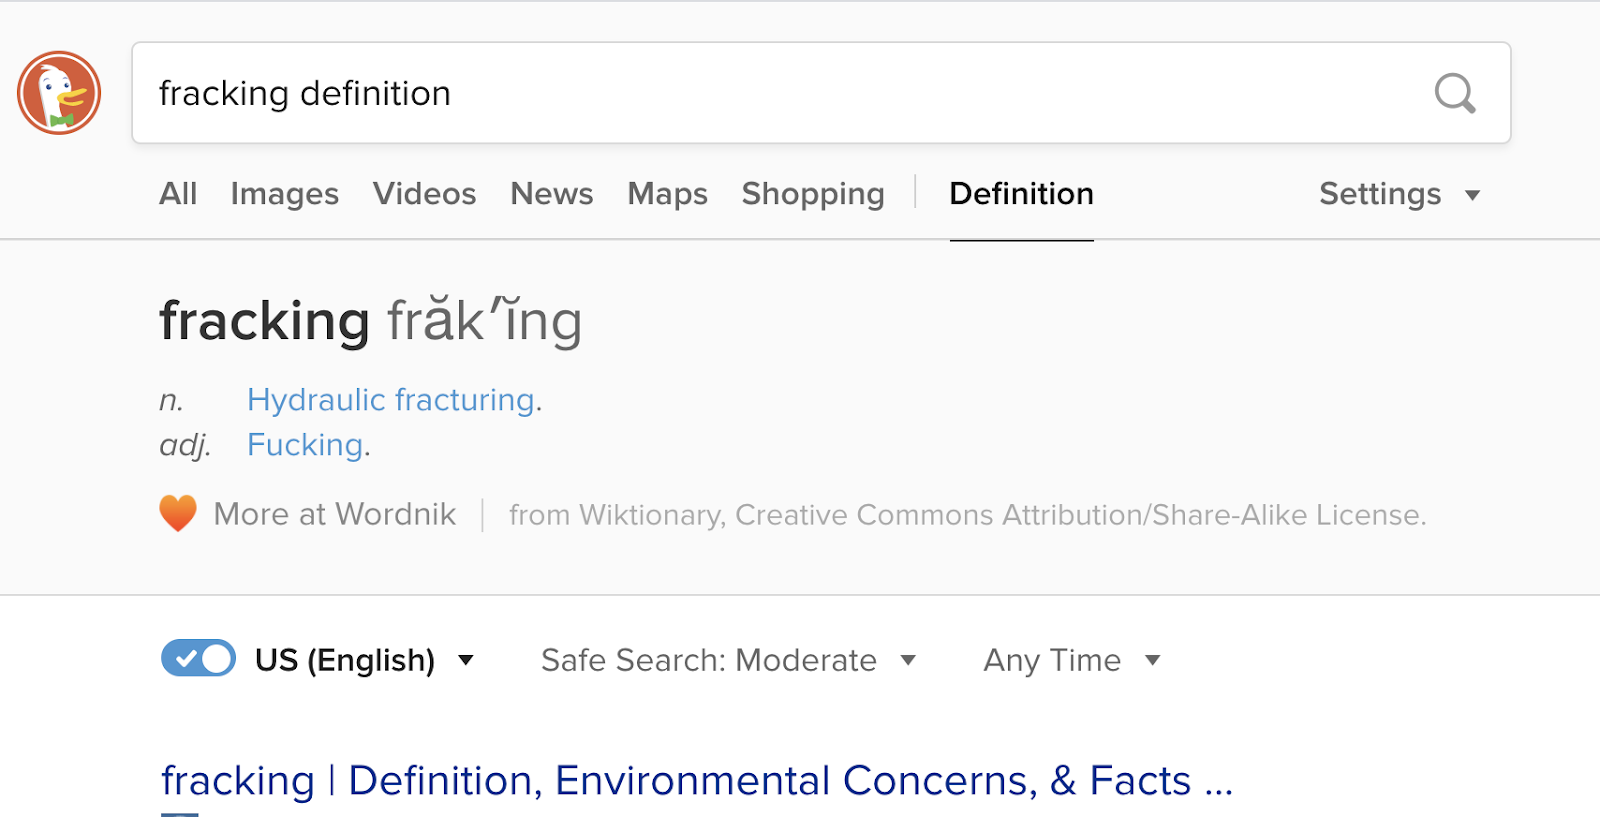 Dictionary definition of the term fracking as  "Hydraulic fracturing" and "Fucking"